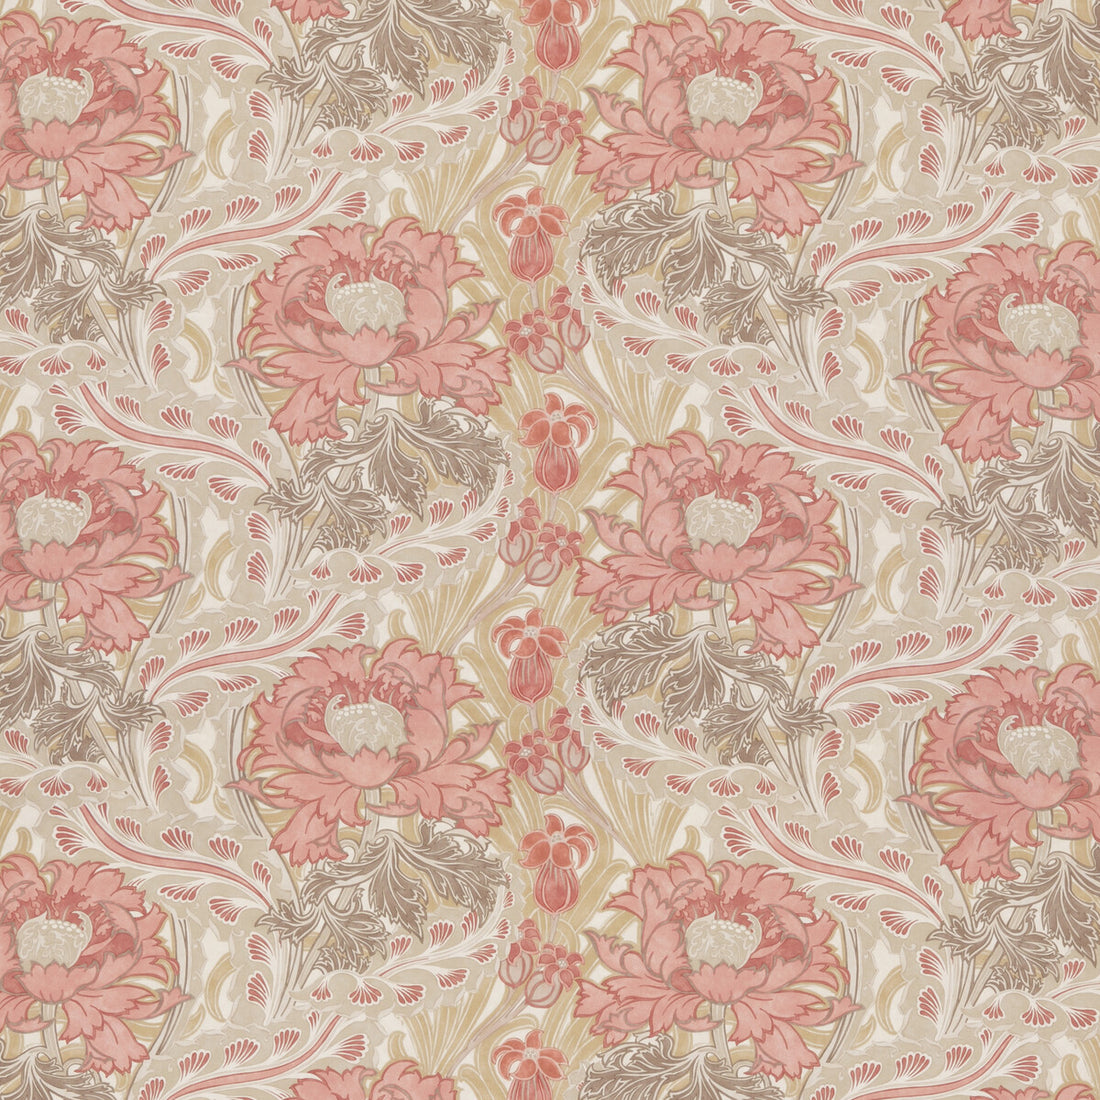 Brantwood Cotton fabric in coral/sand color - pattern BP10969.1.0 - by G P &amp; J Baker in the Original Brantwood Fabric collection